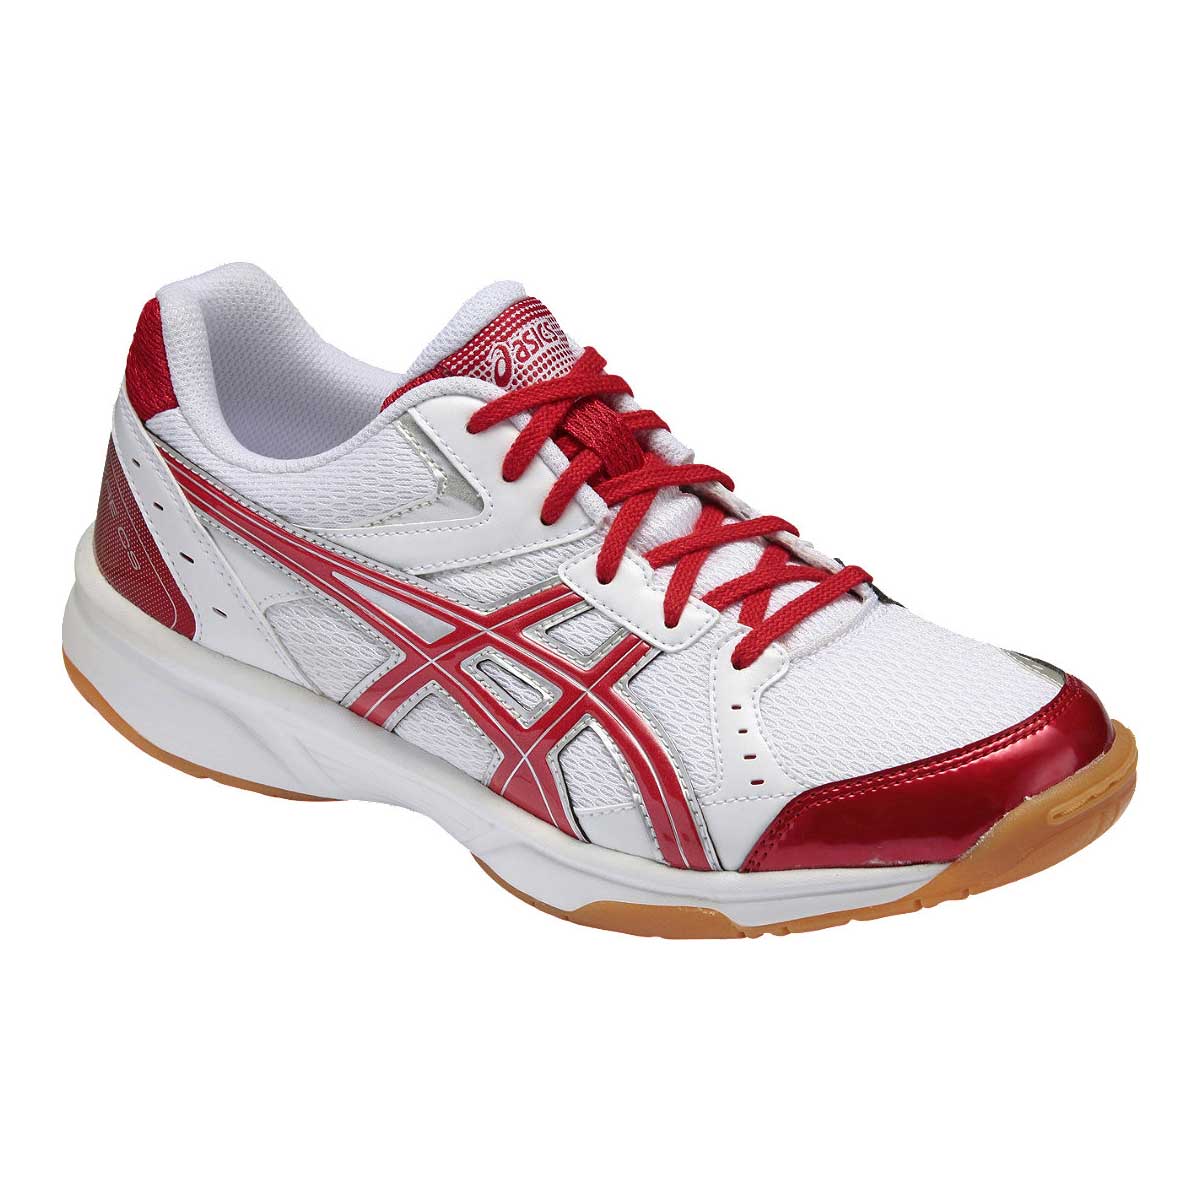 cheapest asics shoes online india